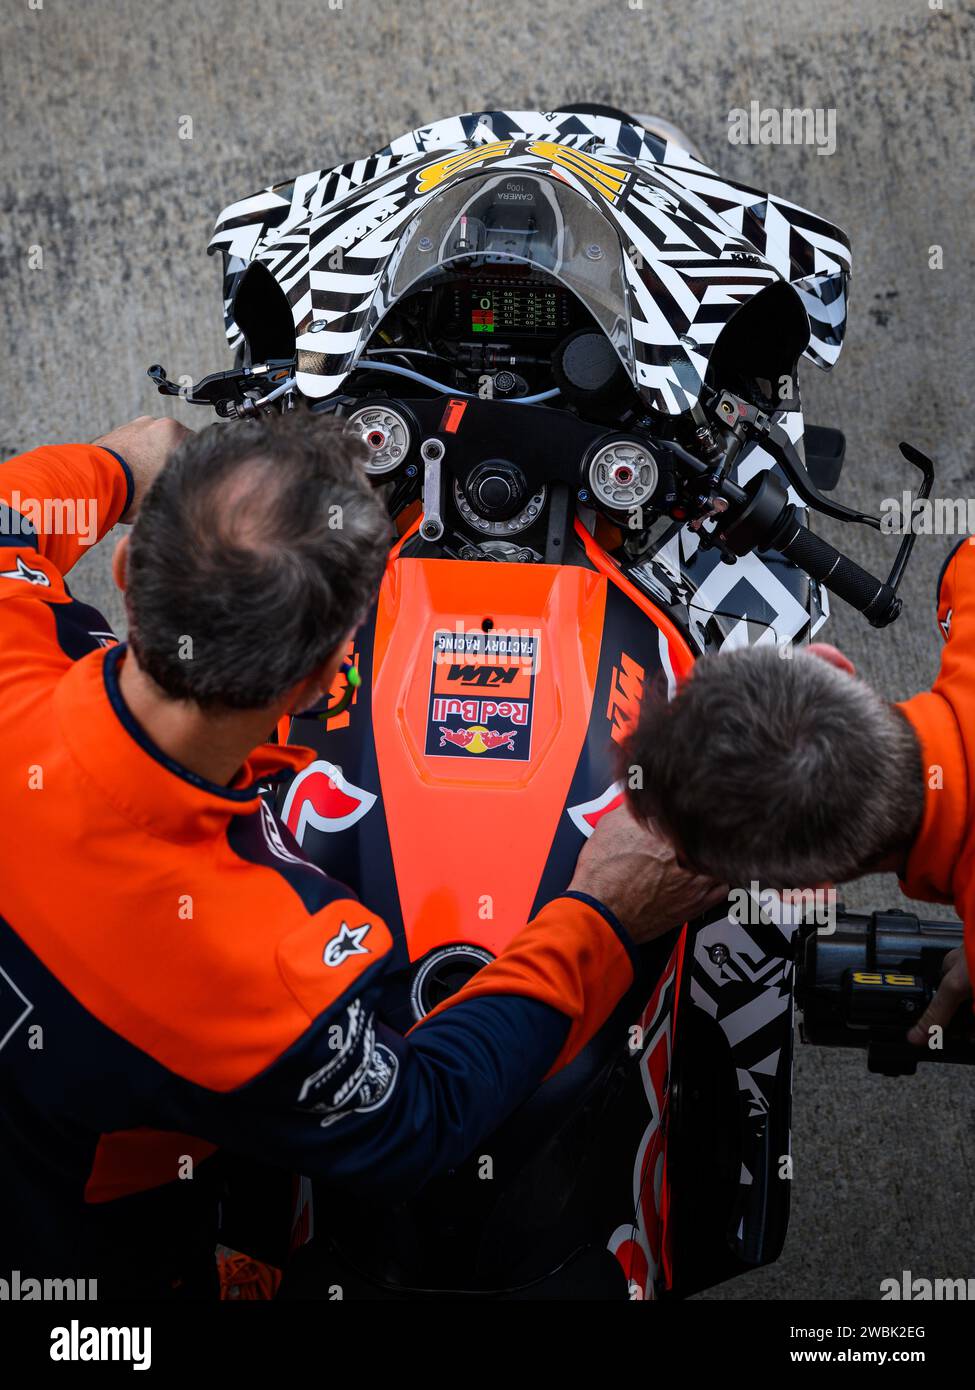 Top view of Brad Binder's KTM Red Bull bike in the pits before heading out for testing at the 2024 Test at the Valencia circuit in Spain. Stock Photo